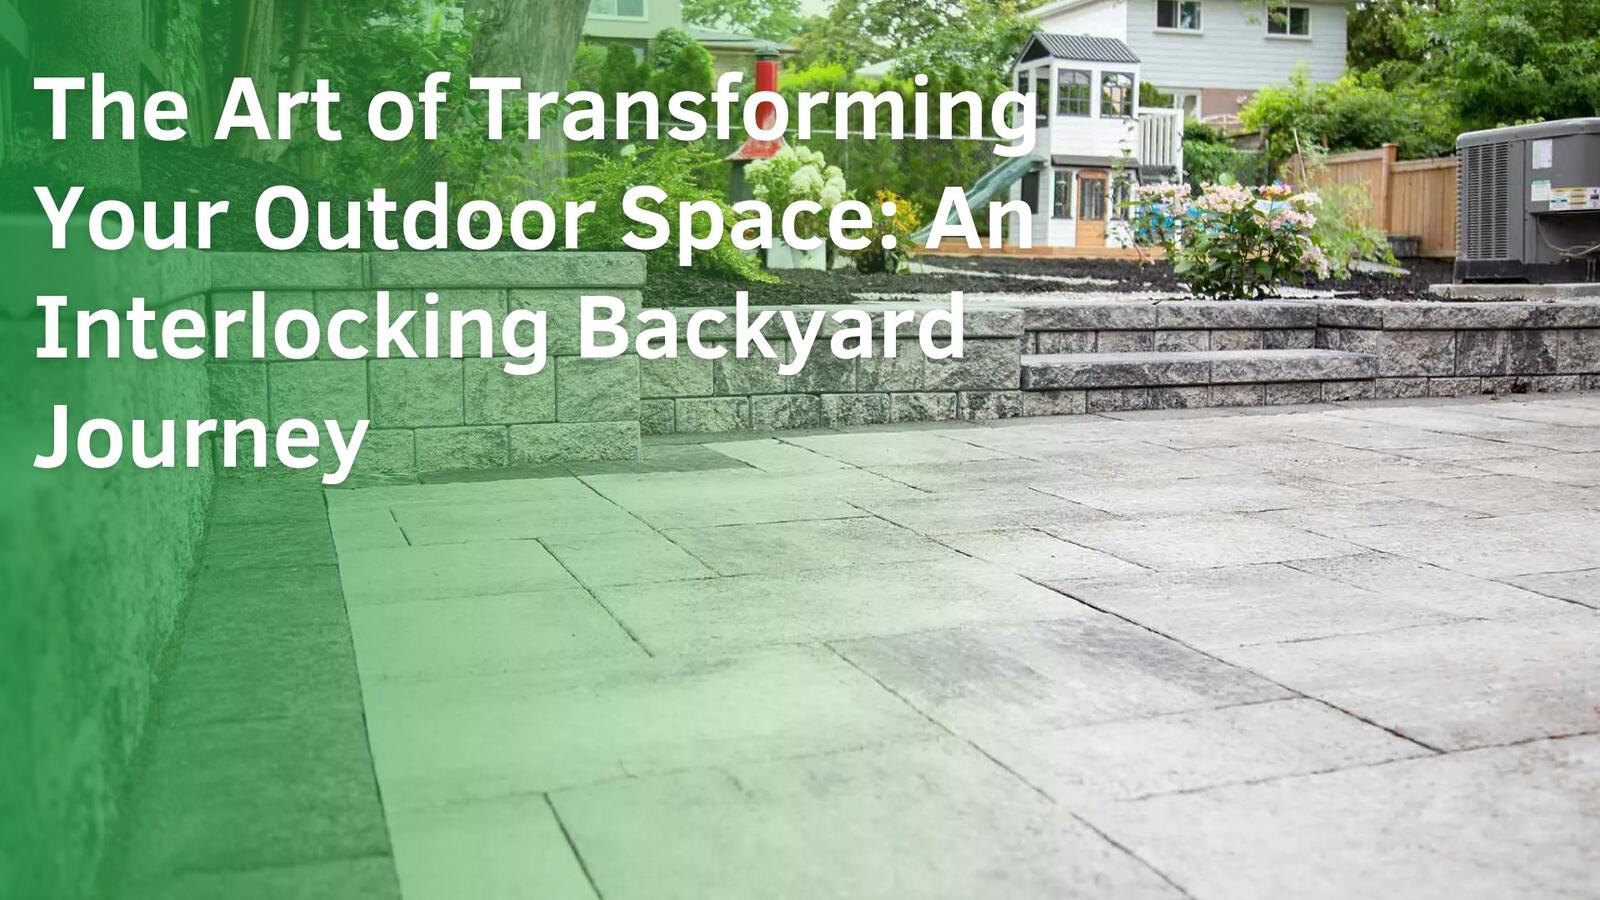 The Art of Transforming Your Outdoor Space: An Interlocking Backyard Journey